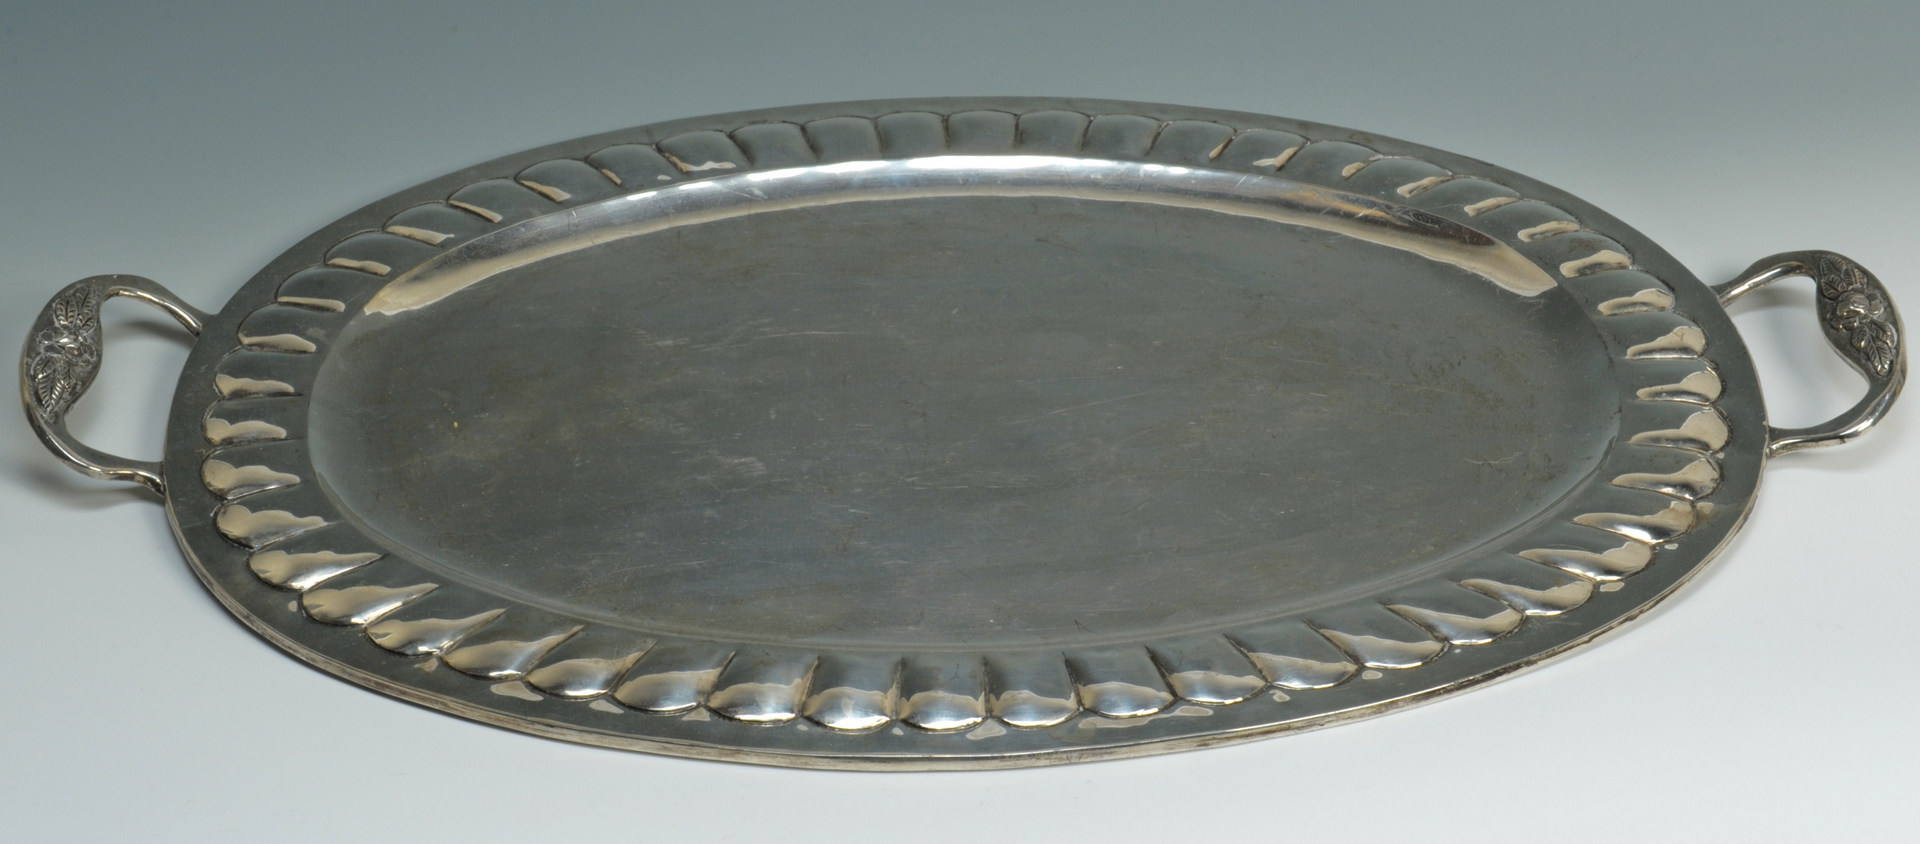 Lot 66: Mexican silver tea service and tray, 15 lbs